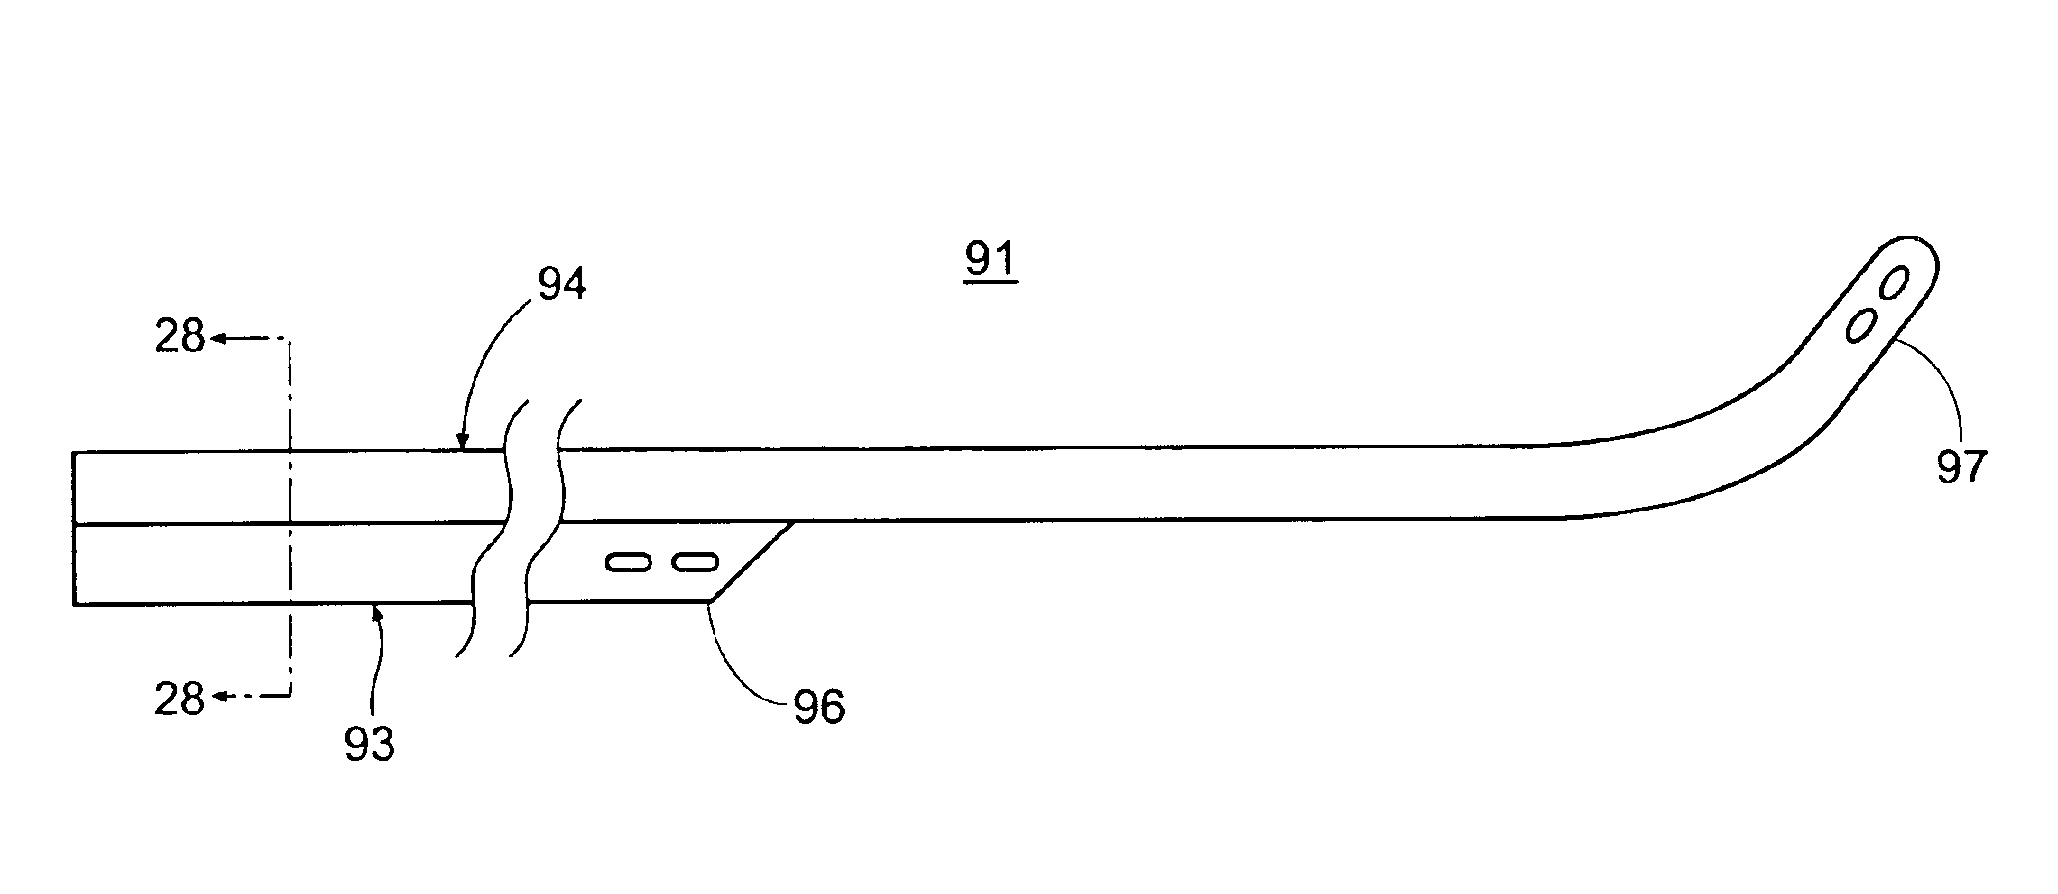 Intravascular cannulation apparatus and methods of use